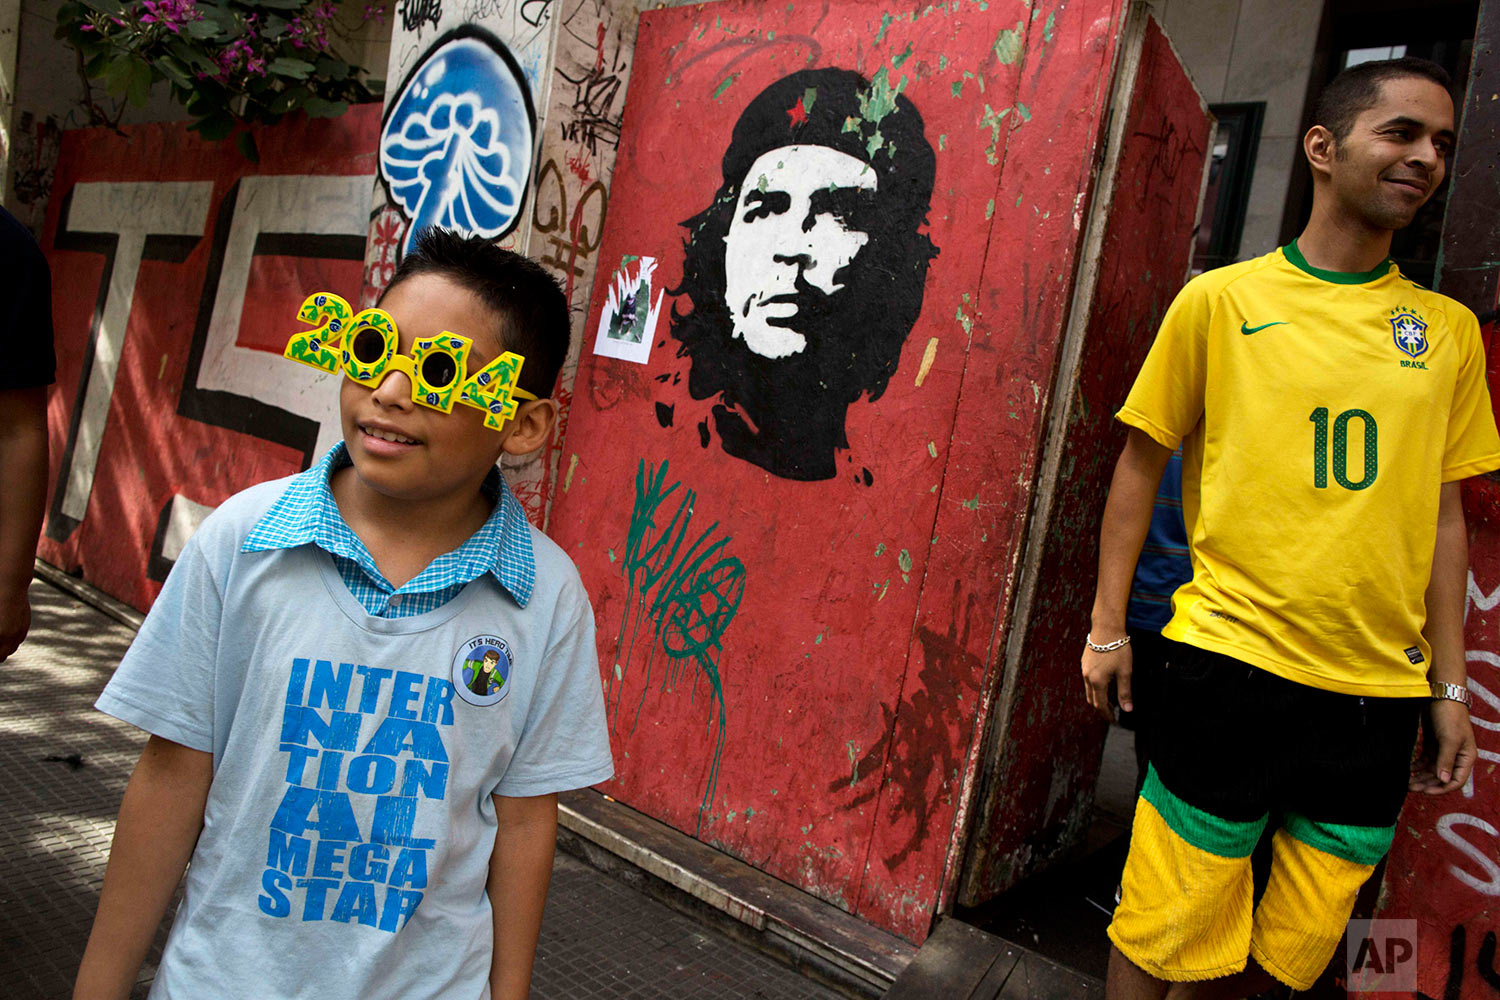  Fans of Brazil stand next to a wall painted with a portrait of famous revolutionary hero Ernesto Che Guevara before the Chile vs. Brazil match during the 2014 soccer World Cup in Sao Paulo, Brazil, Saturday, June 28, 2014.(AP Photo/Rodrigo Abd) 